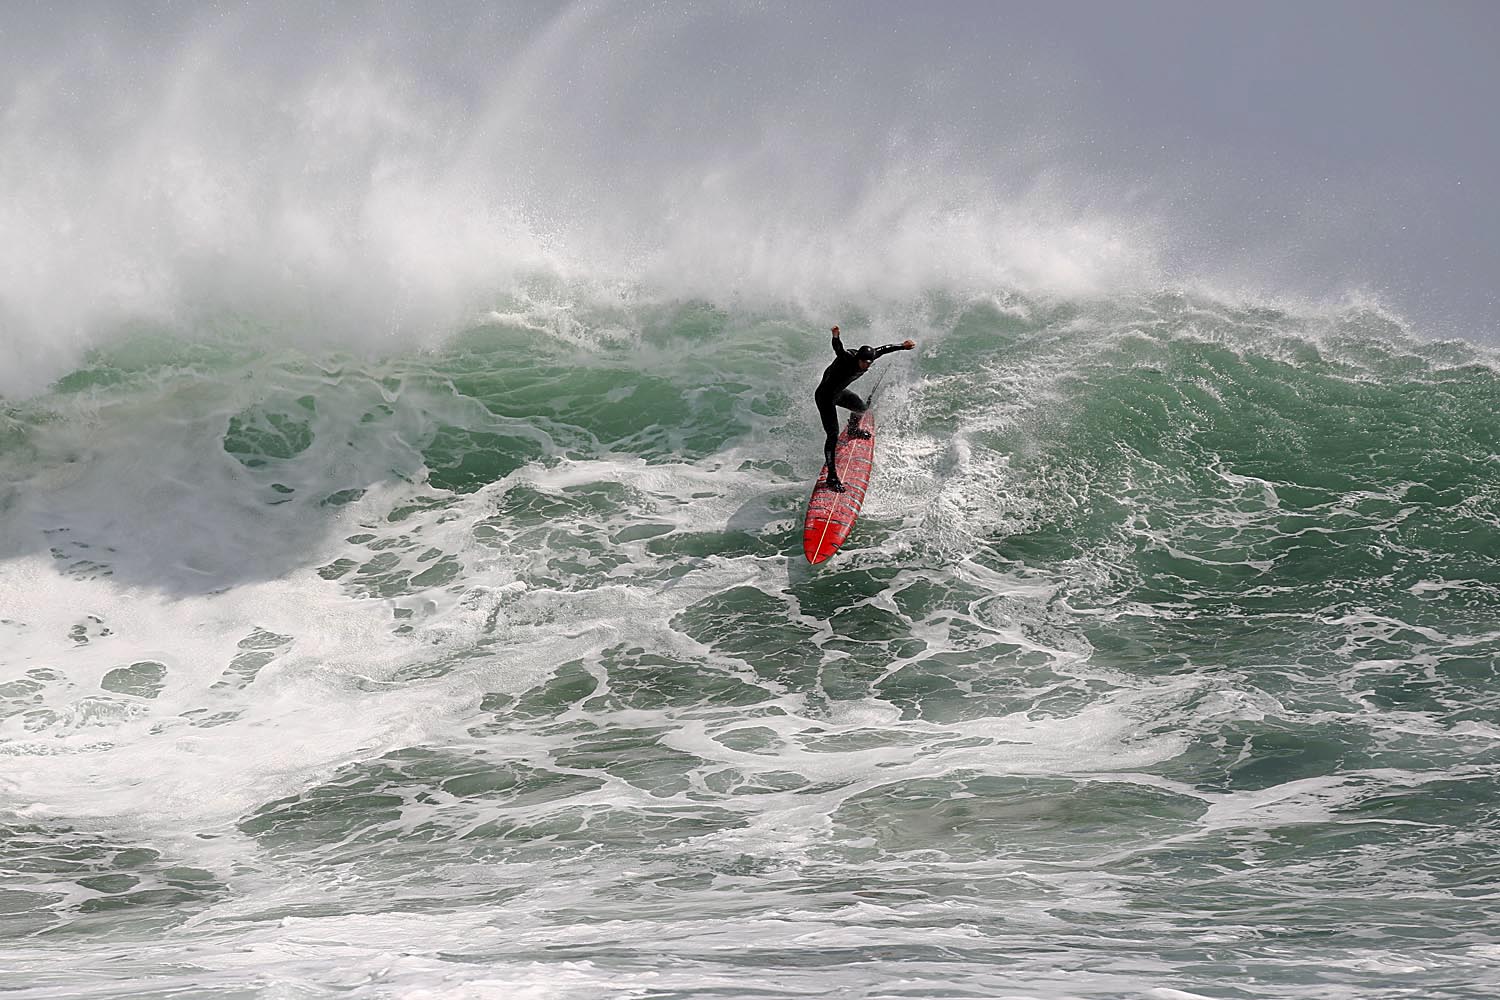 REBEL Sessions 2011 – Rebel Sessions Big Wave Surfing event in Cape Town, South Africa